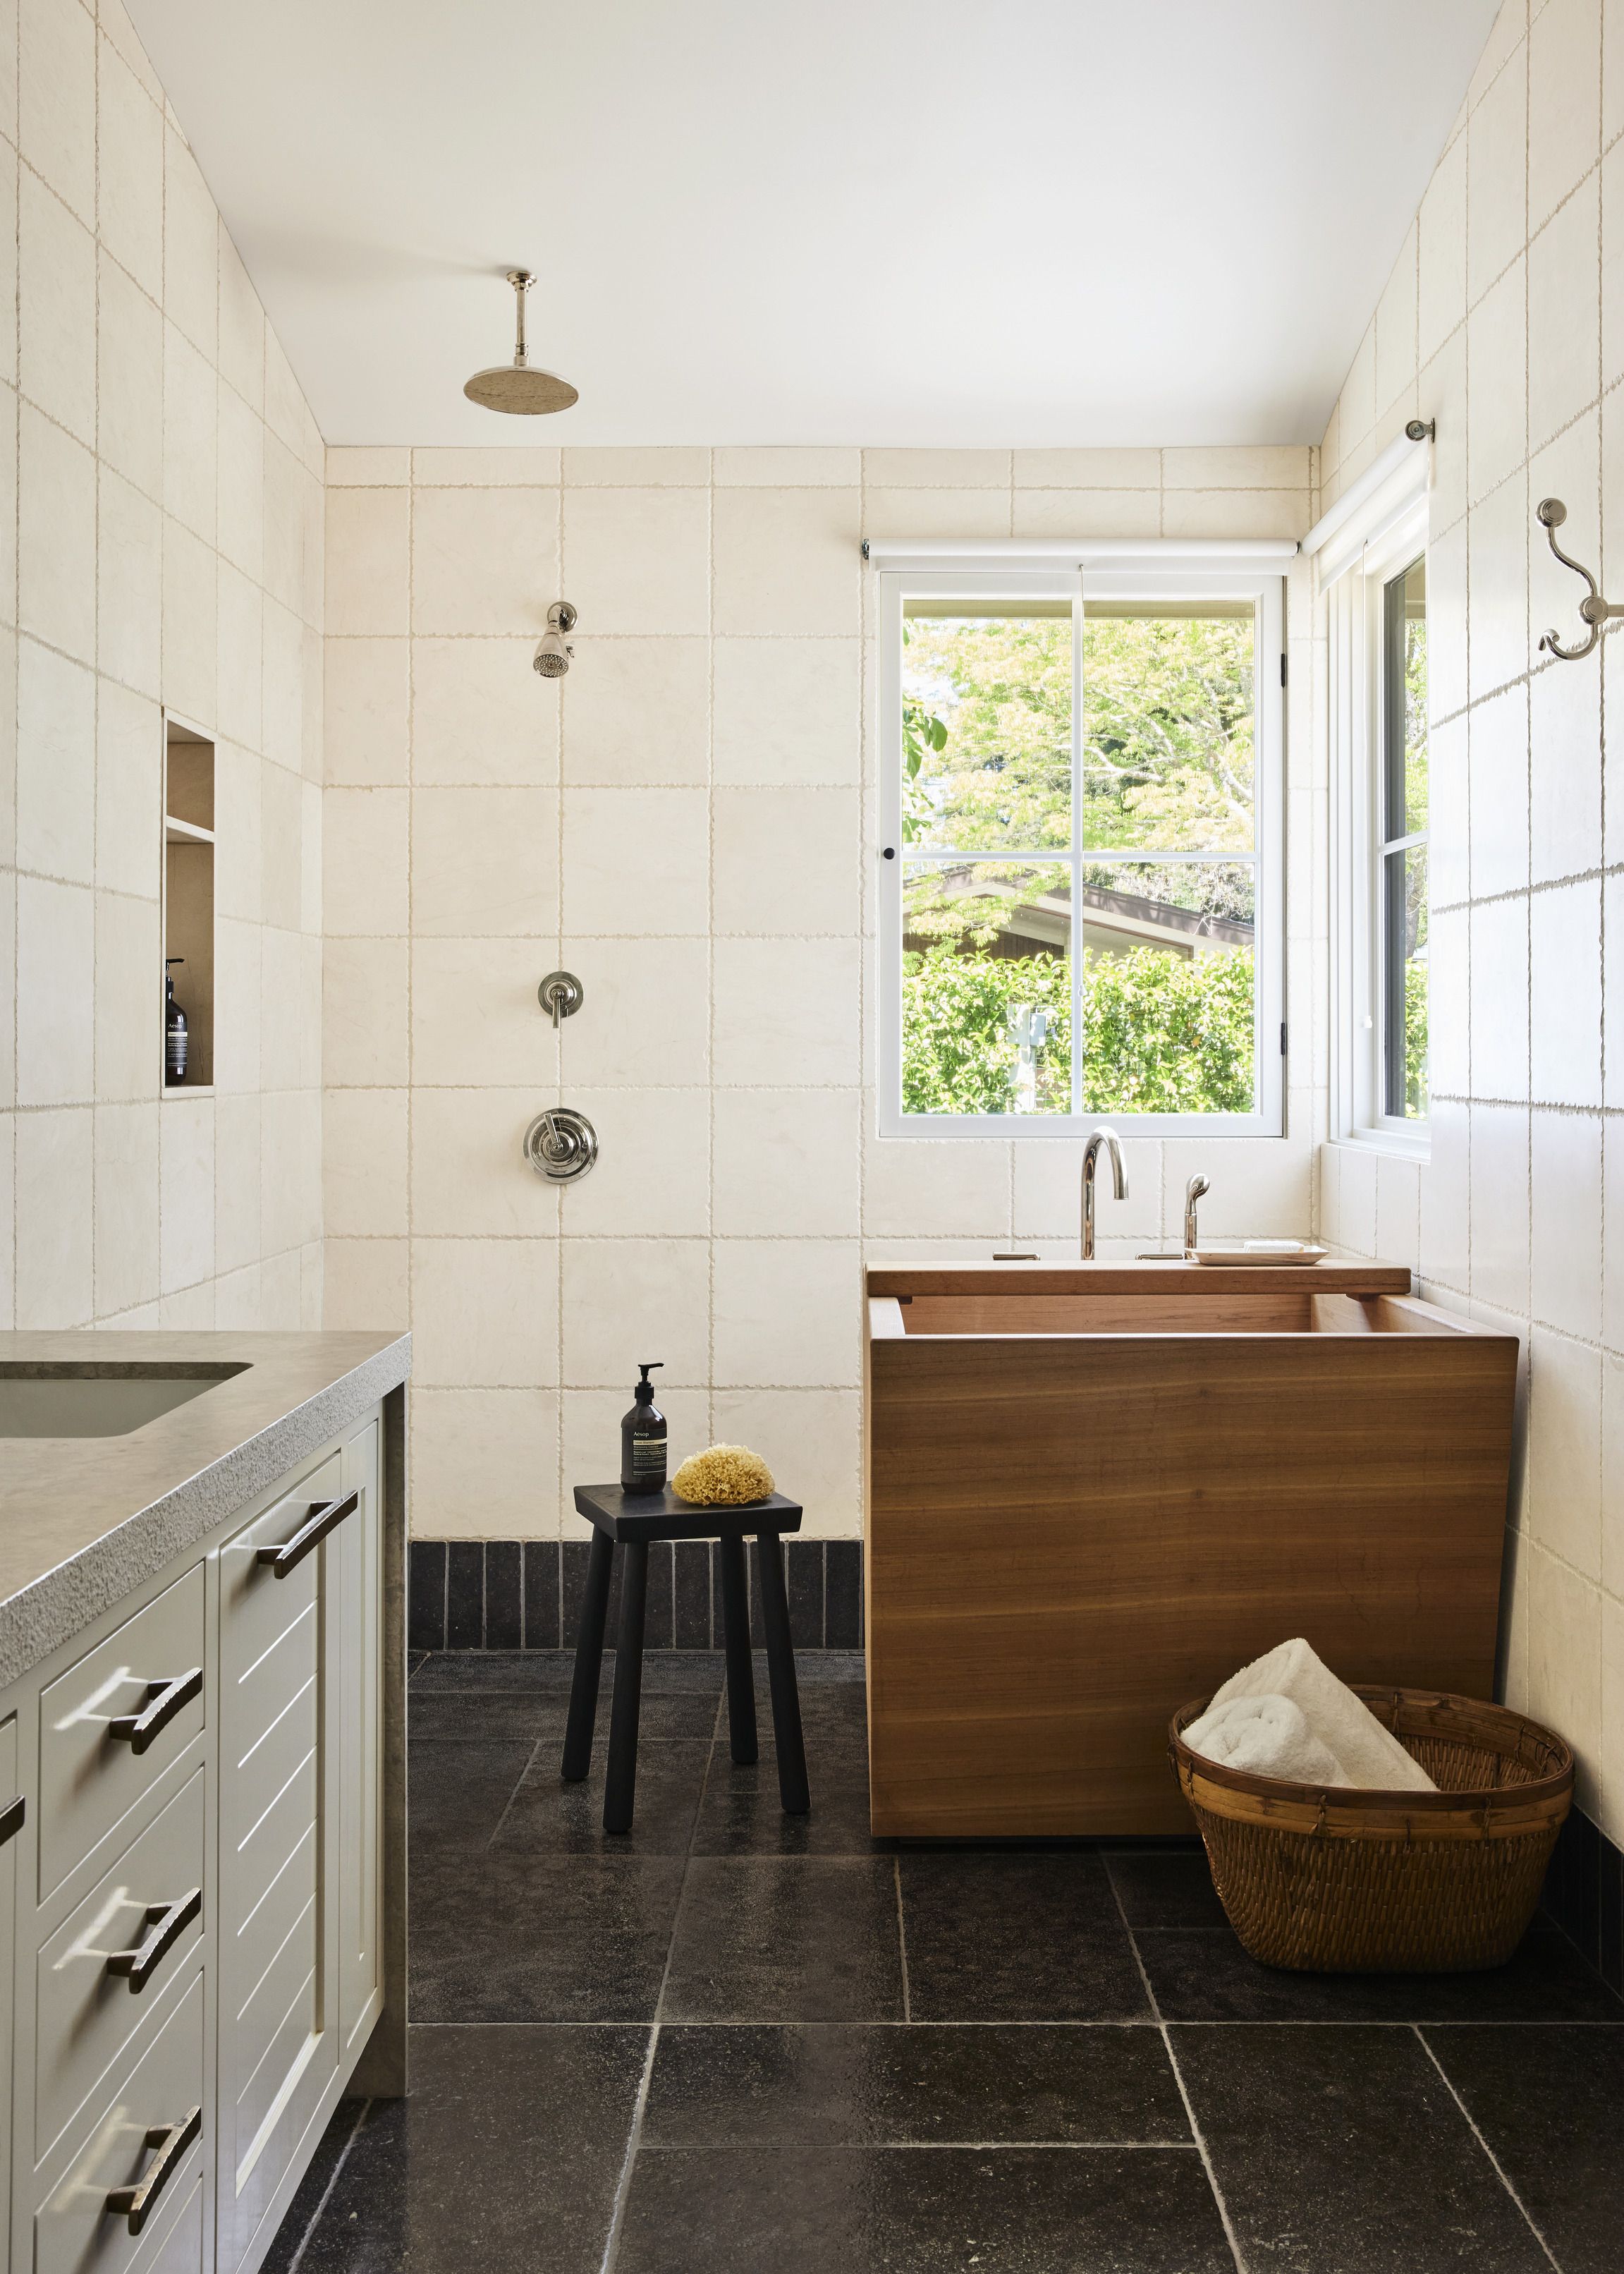 5 Upgrades for Spa-Style Bathroom Interiors